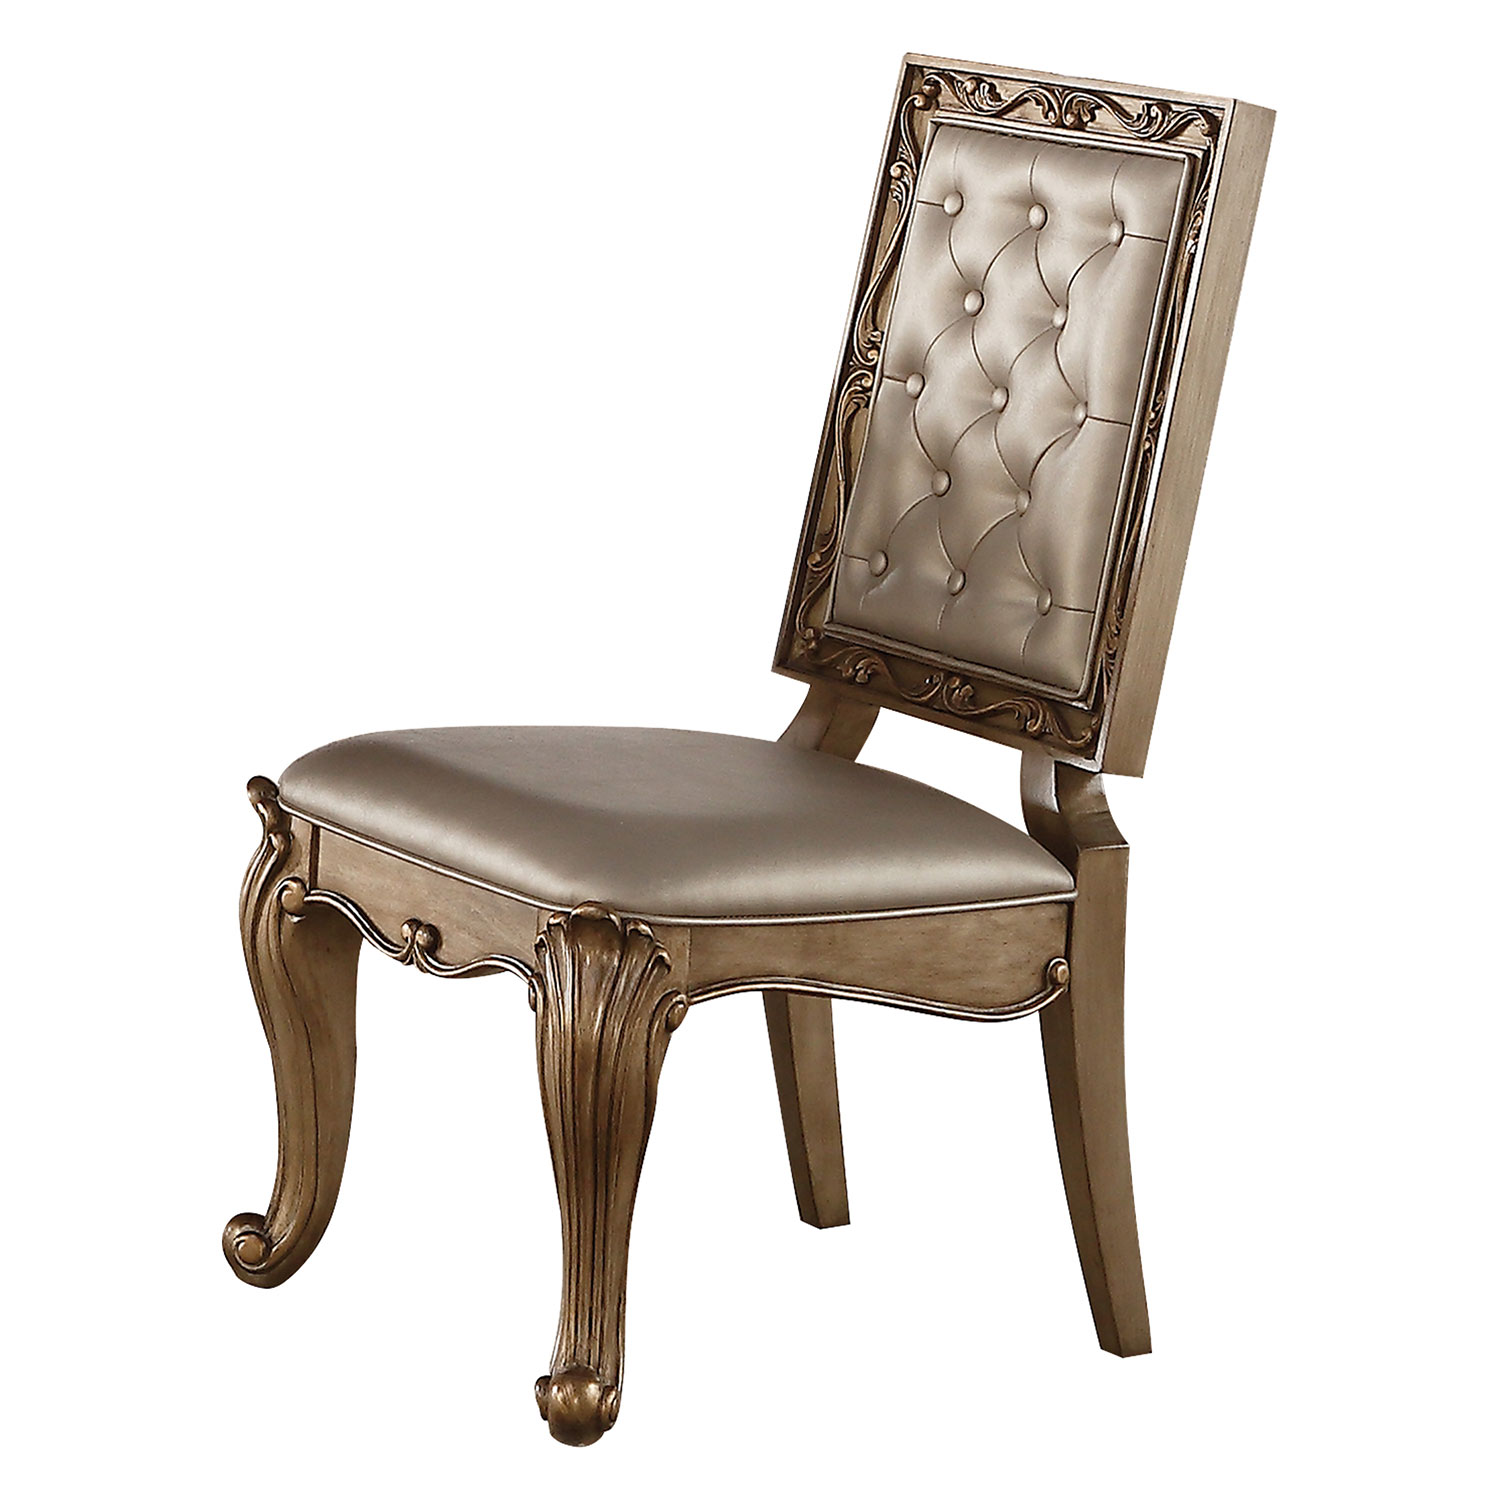 Acme Orianne Side Chair (Square) - Champagne Vinyl/Antique Gold